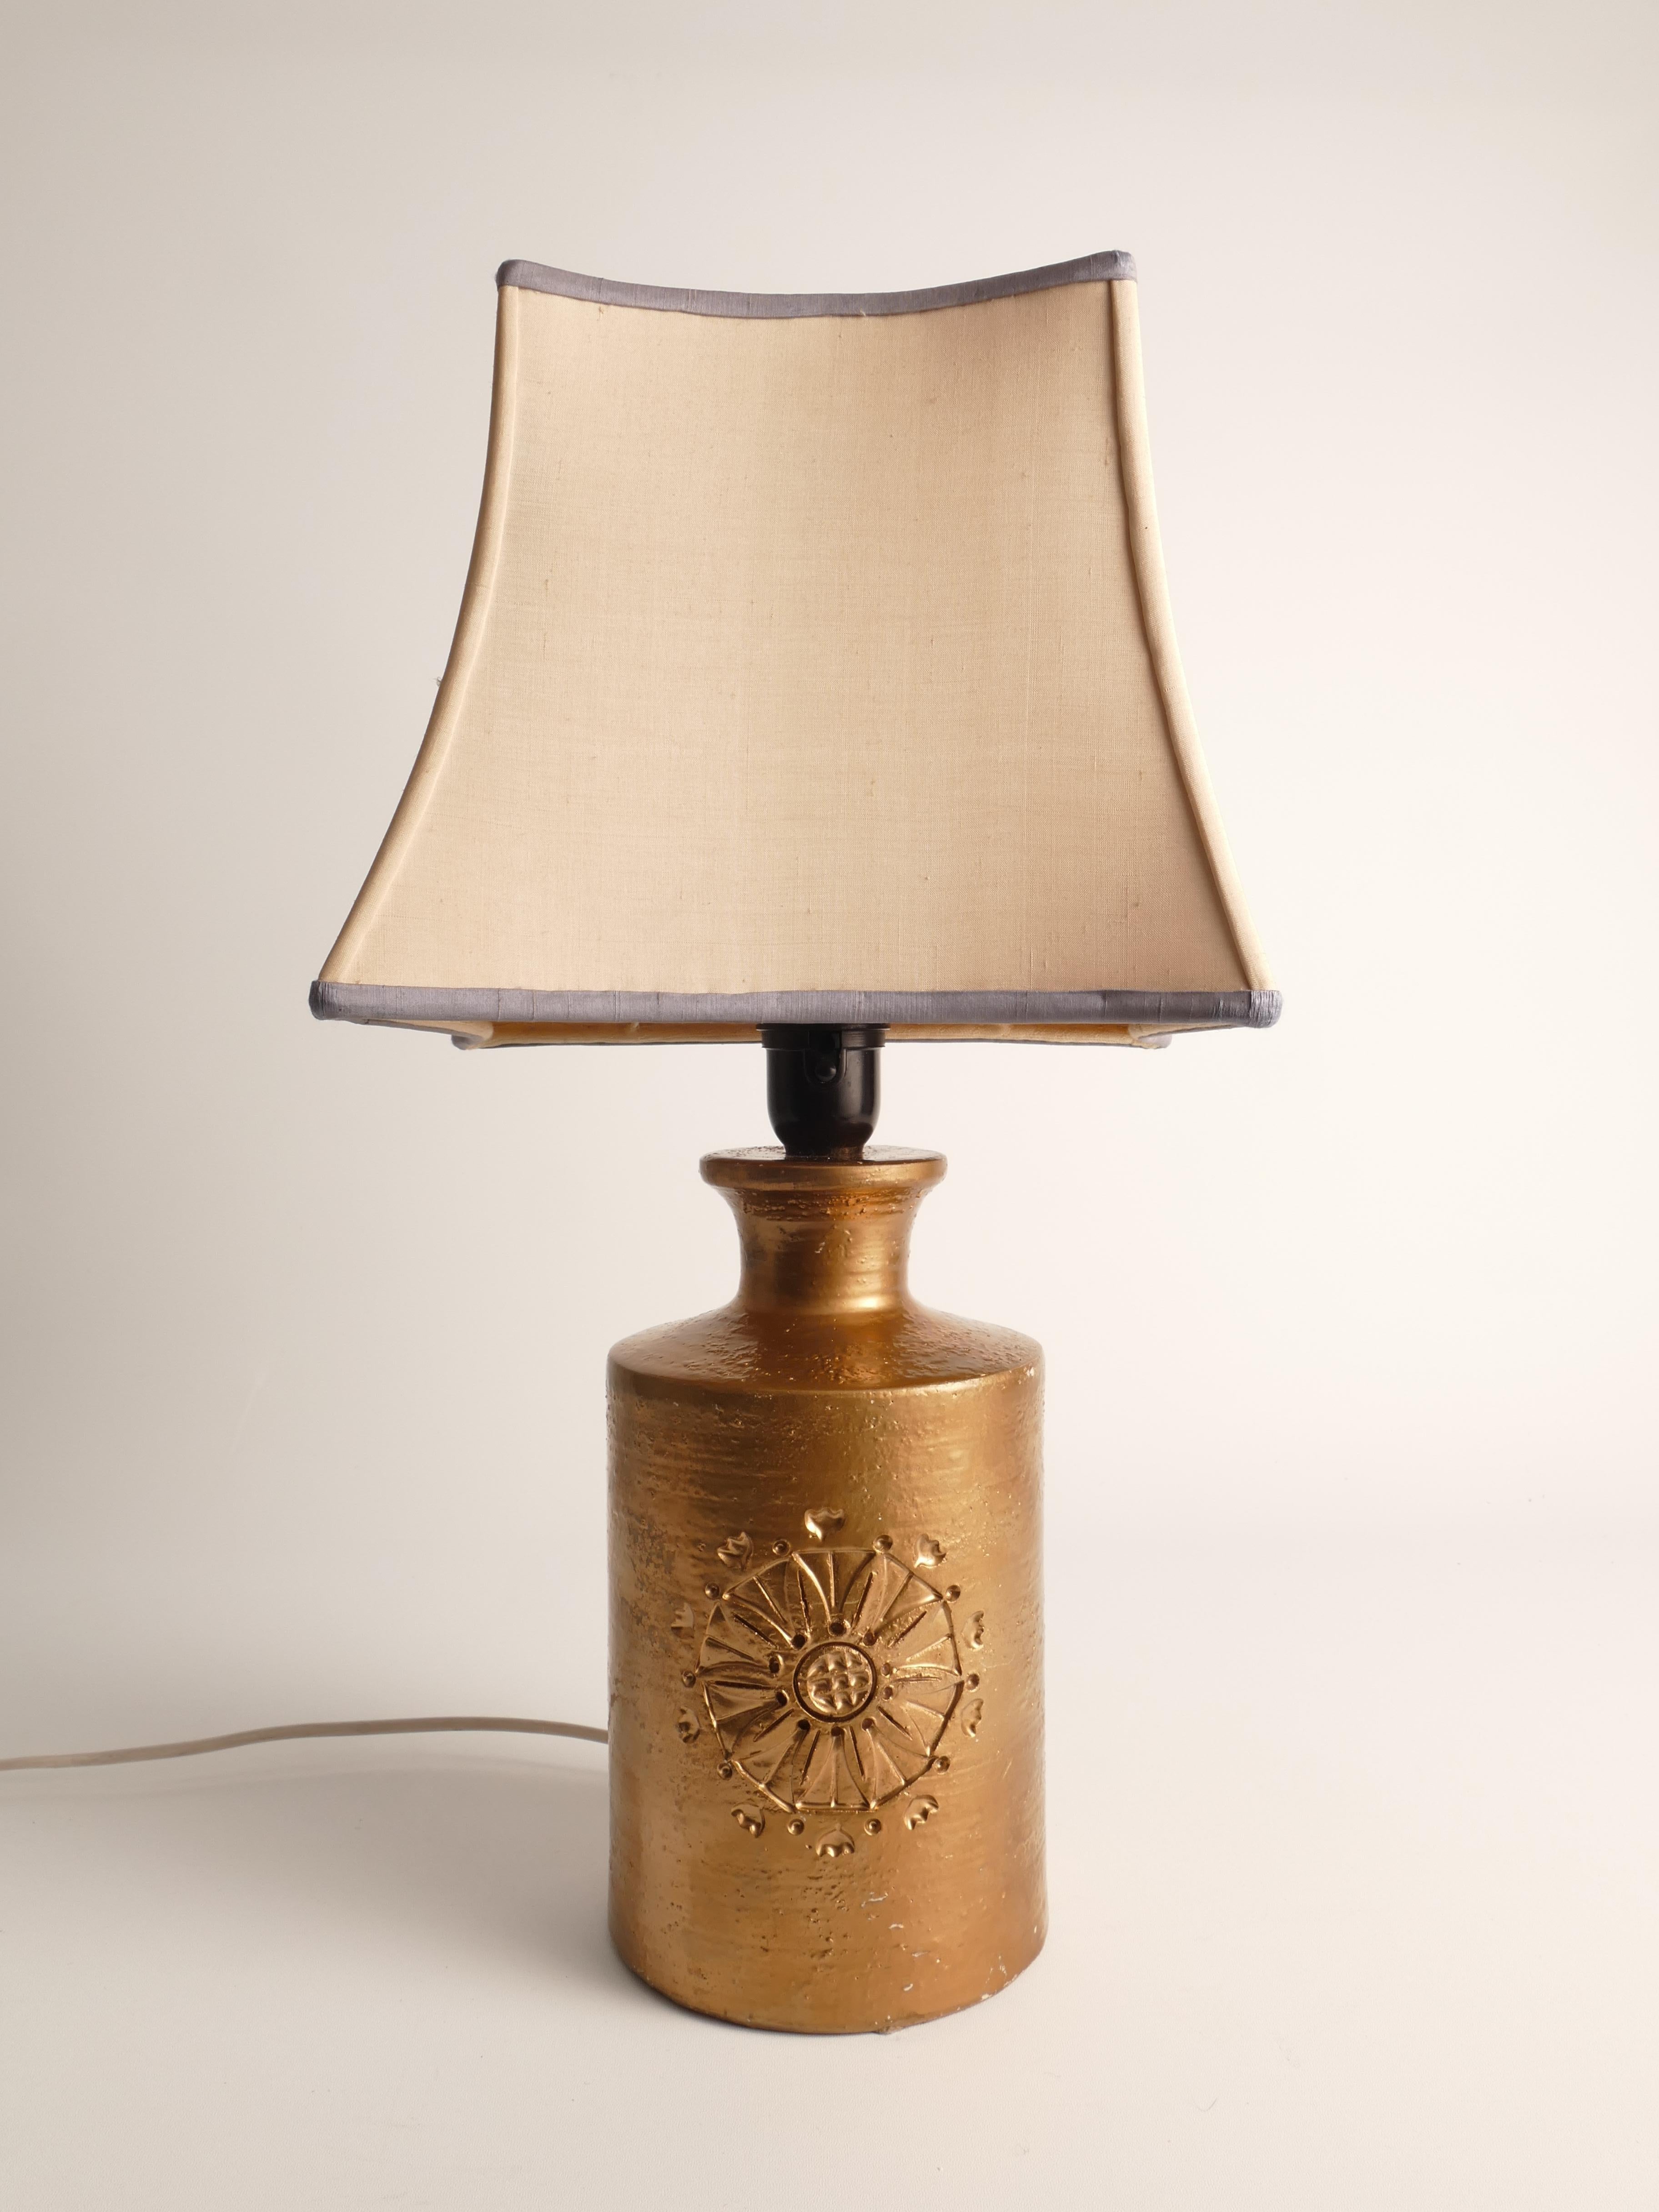 Gold Glazed Ceramic Table Lamps by Bitossi for Bergboms, Set of 2, 1970's For Sale 2